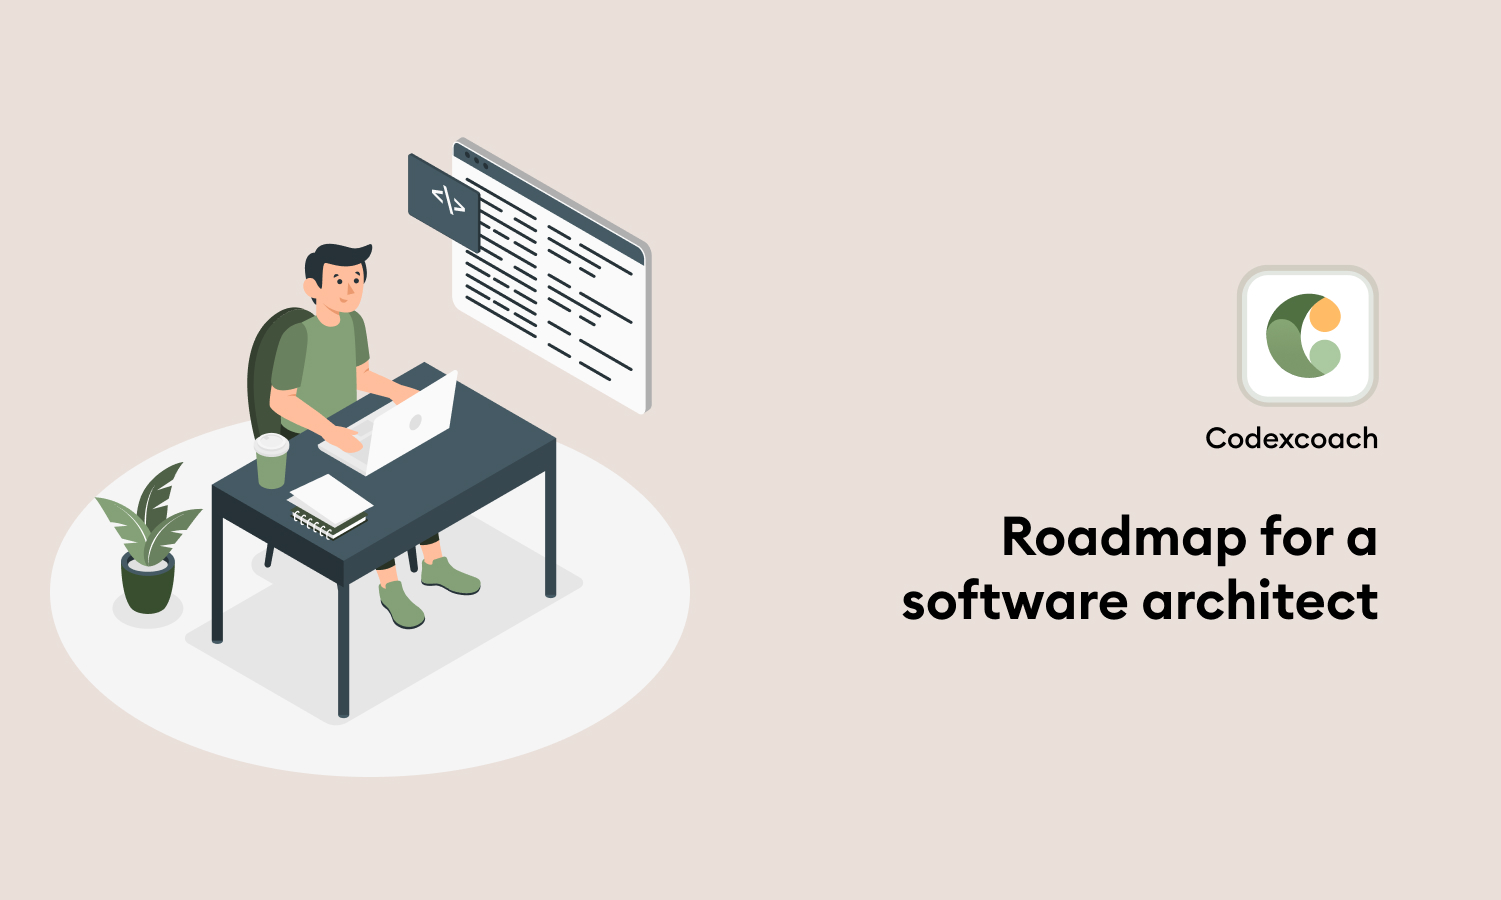 Roadmap for a software architect